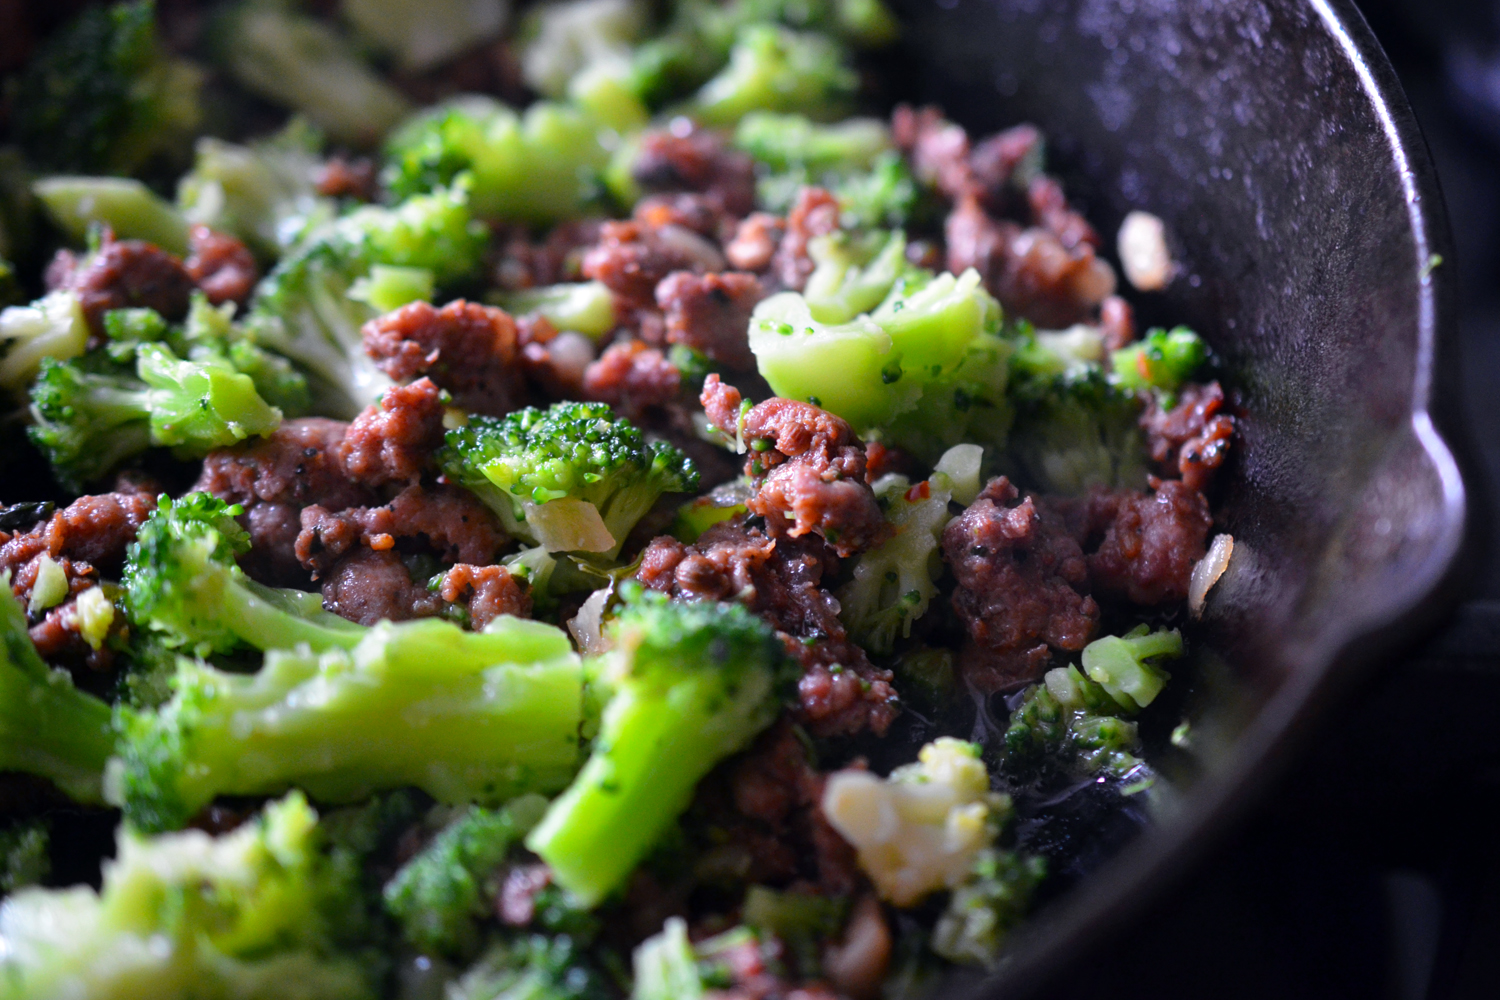 A close up of a cast iron frying pan filled with leftover ground meat and cut up frozen broccoli.